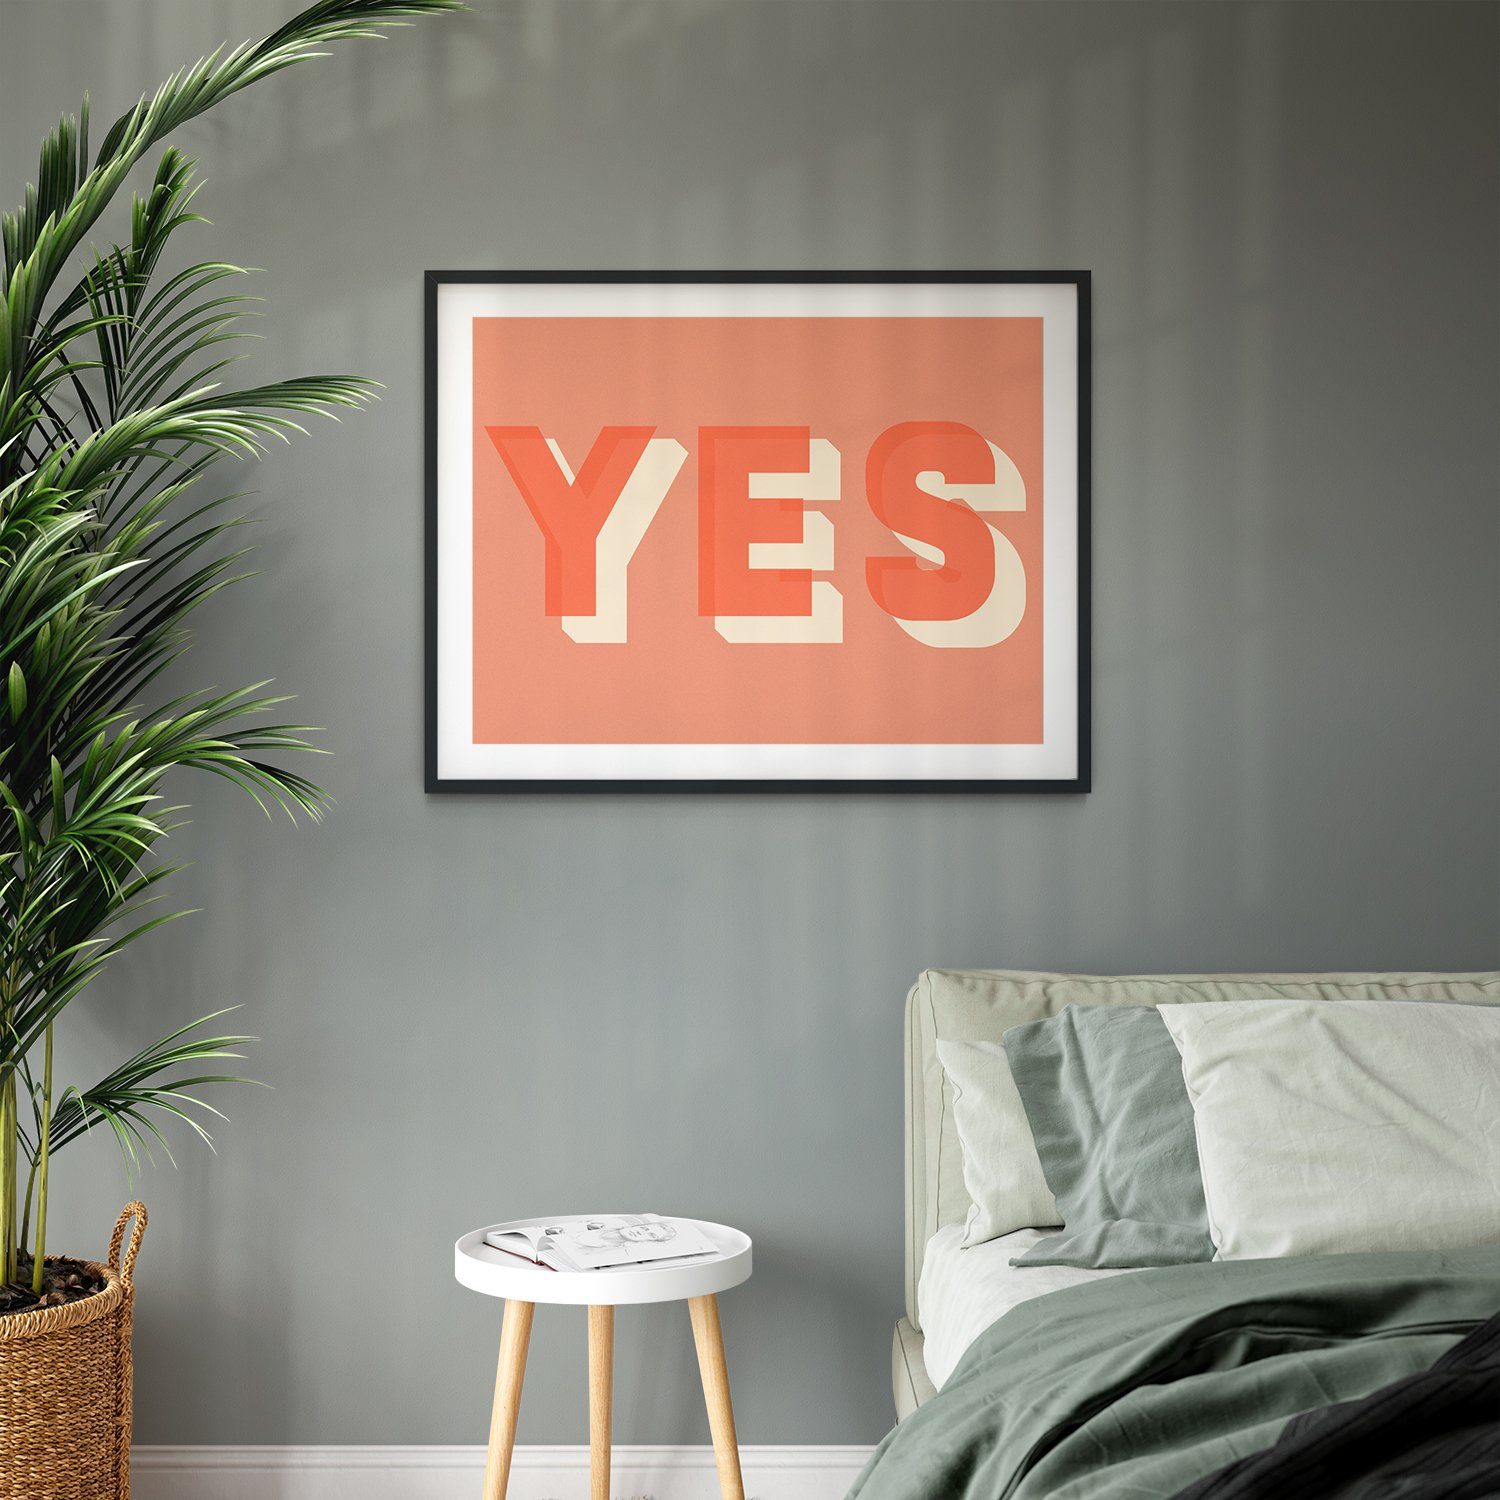 Print with the word YES in large orange text